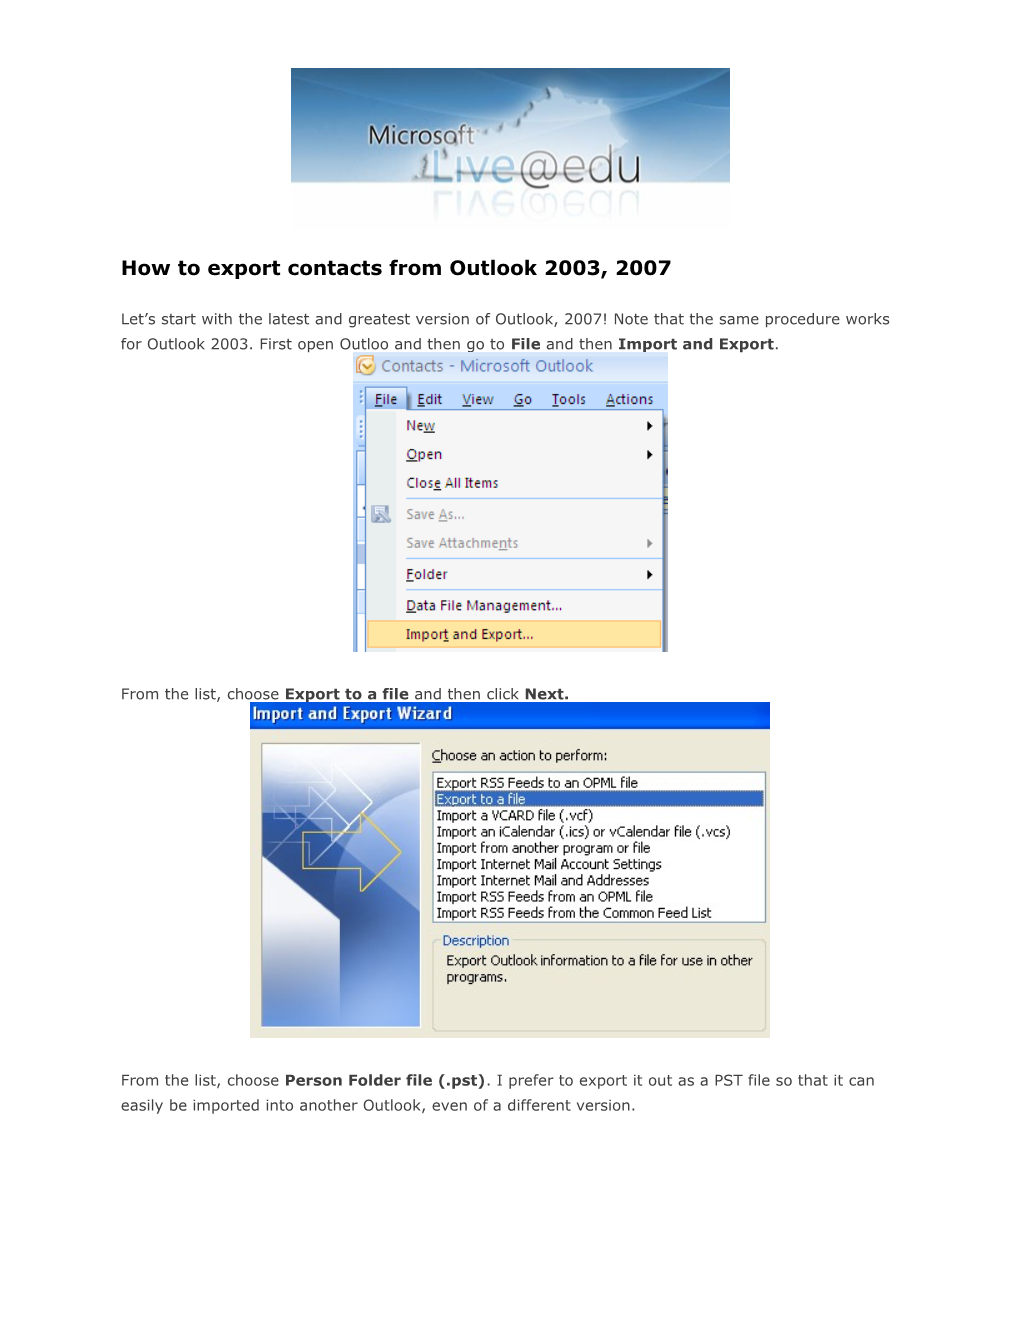 How to Export Contacts from Outlook 2003, 2007